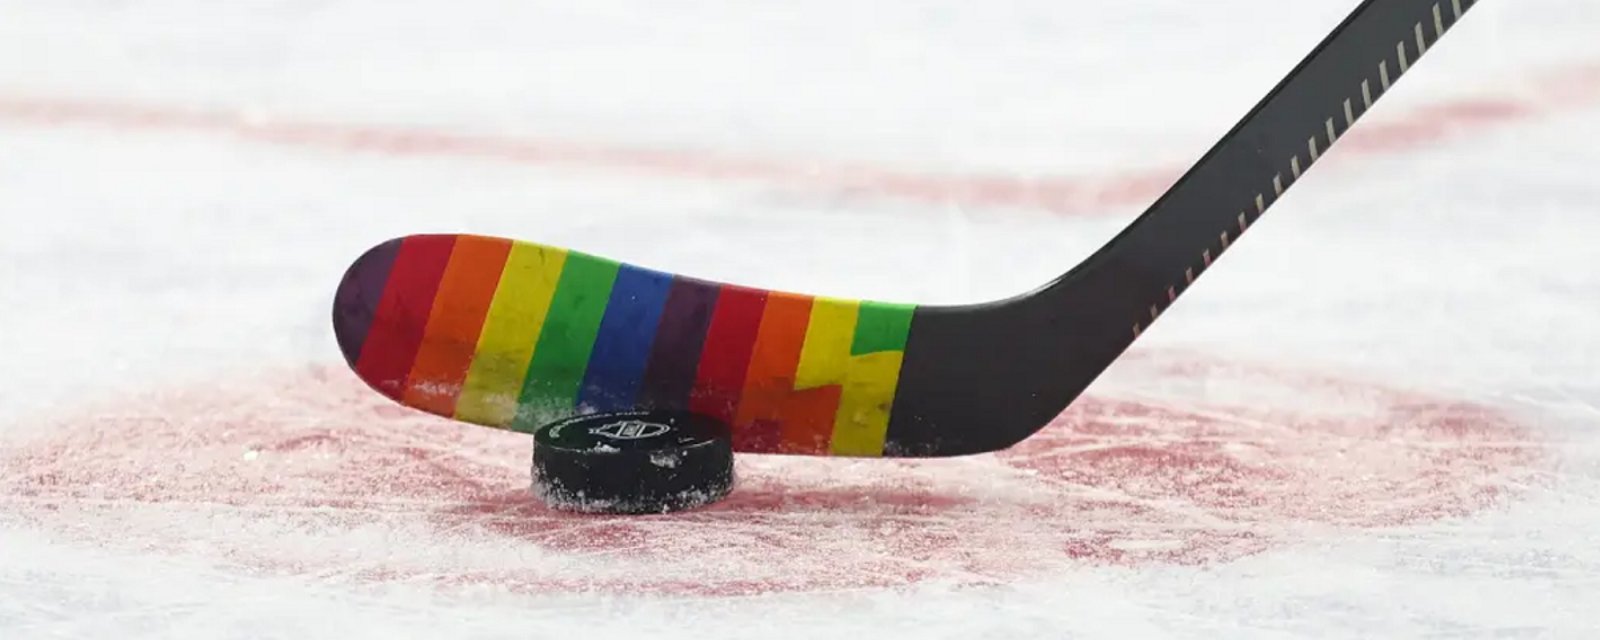 Rangers spark another 'Pride jersey' controversy in the NHL.